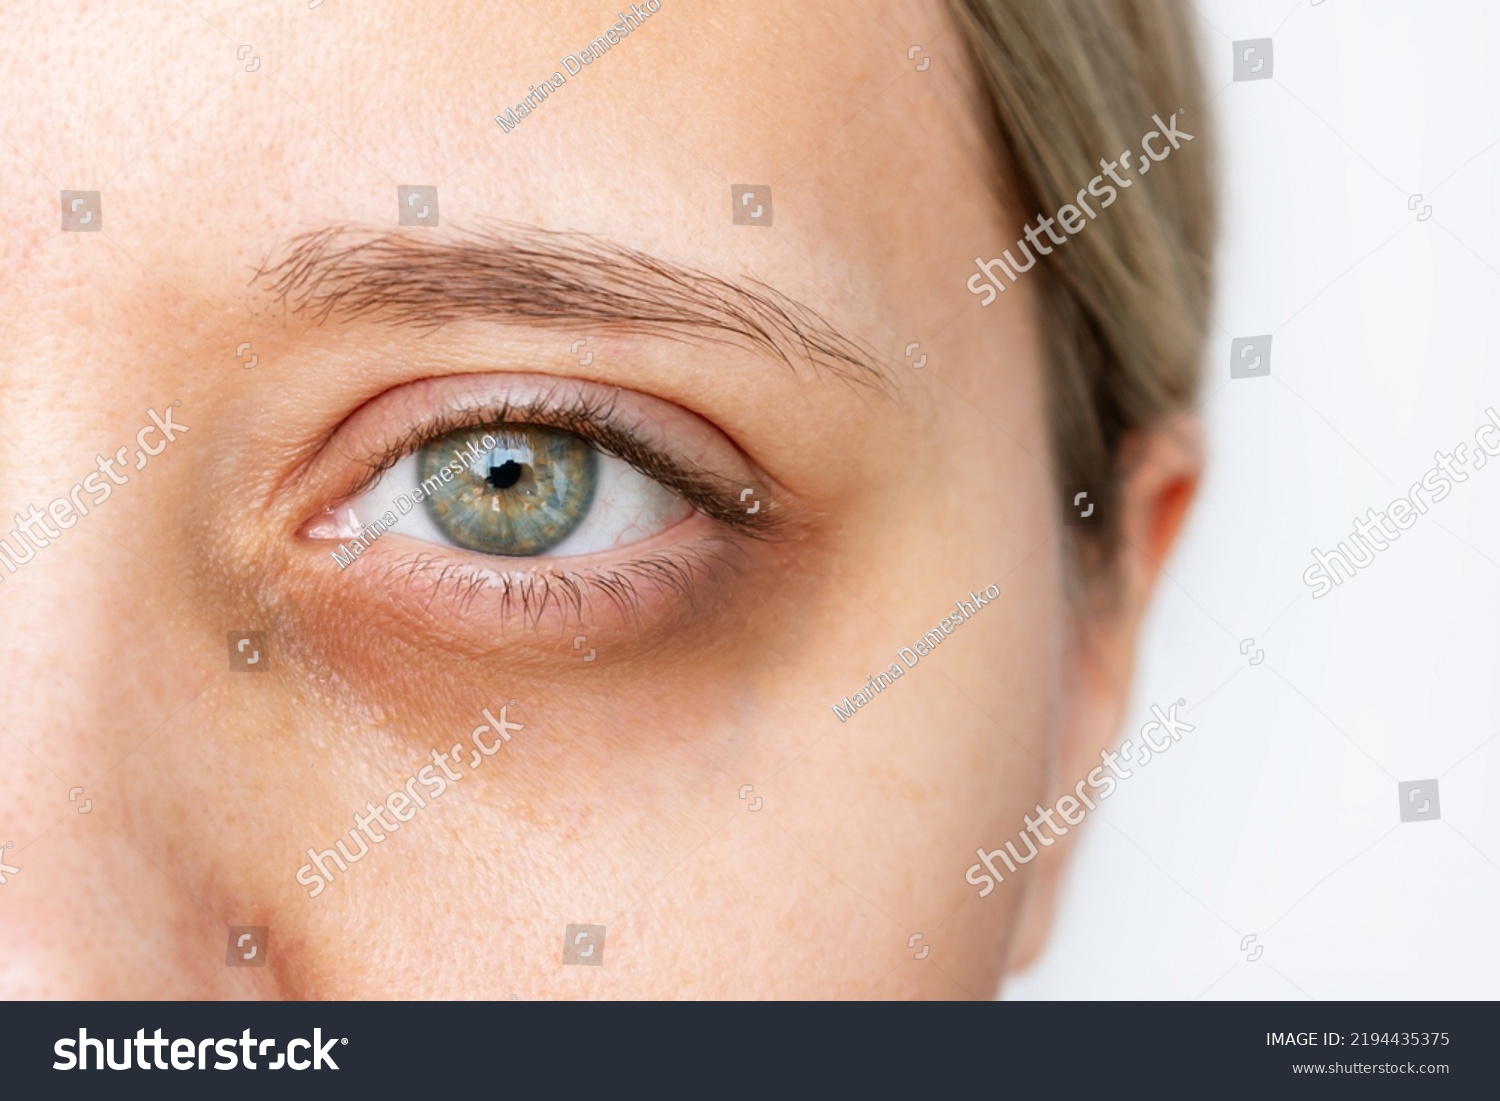 Cropped shot of a young caucasian woman's face with dark circle under eye isolated on a white background. Pale skin, bruises under eyes. Insomnia, stress #2194435375